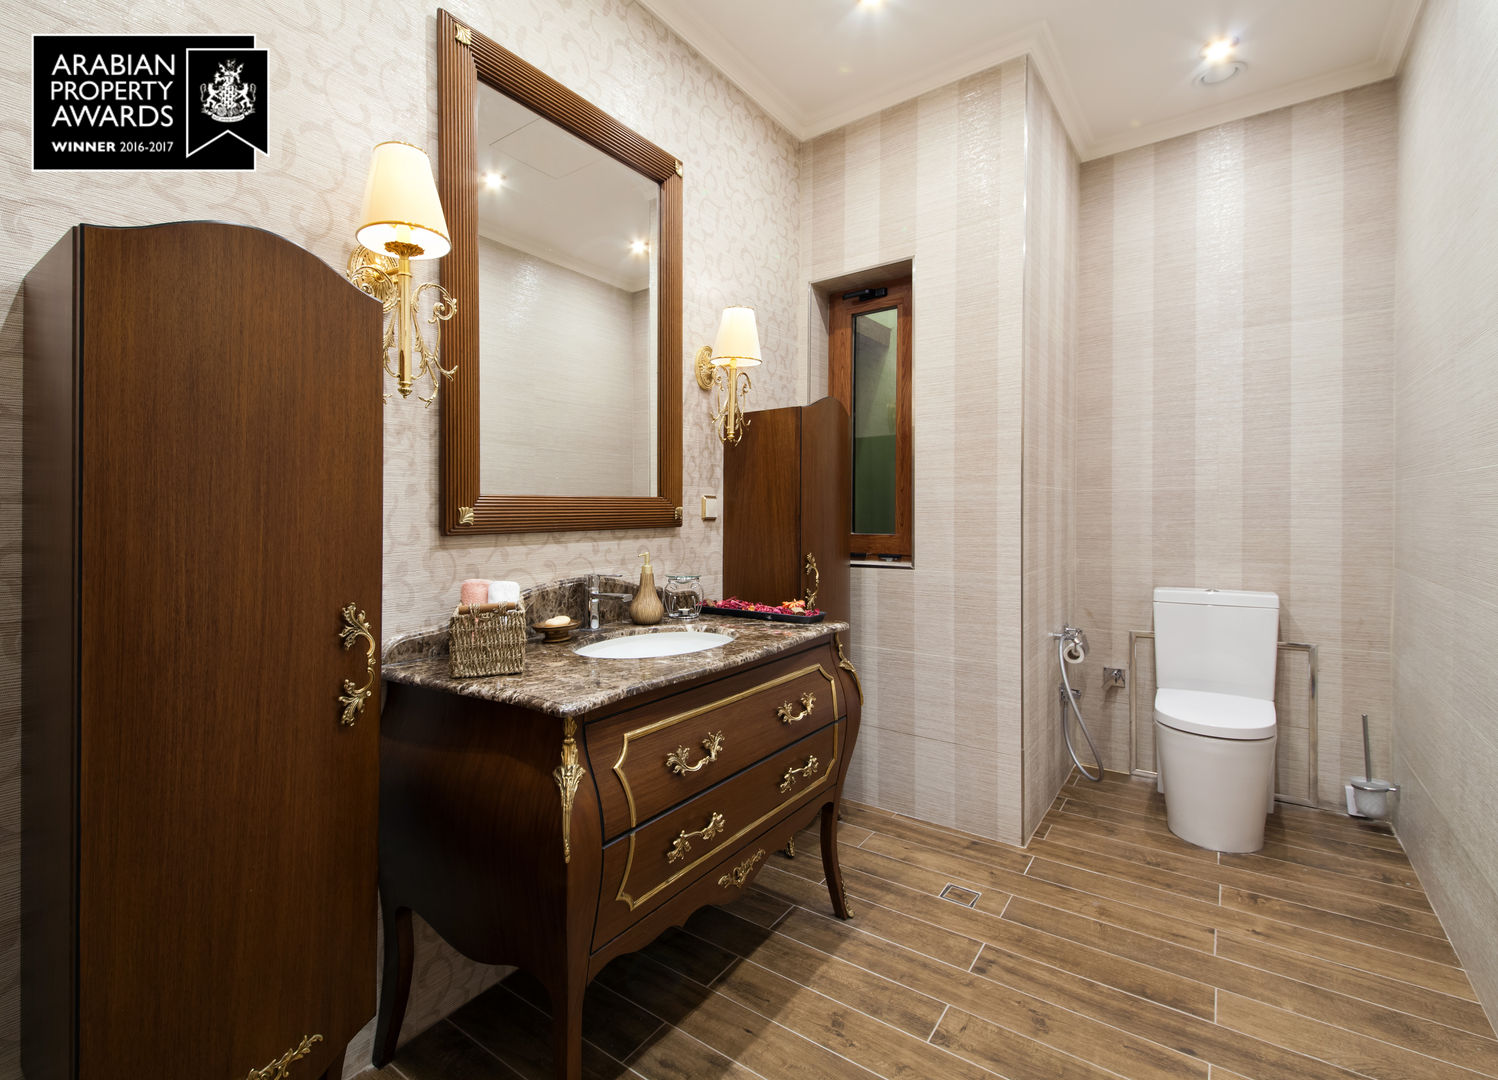 FF-Bathroom / Private Villa Sia Moore Archıtecture Interıor Desıgn Klassische Badezimmer Holz Holznachbildung sia moore,turnkey project,fit out contractor,architectural,luxury design,interior design,designer,design,classical design,best design,perfect,amazing